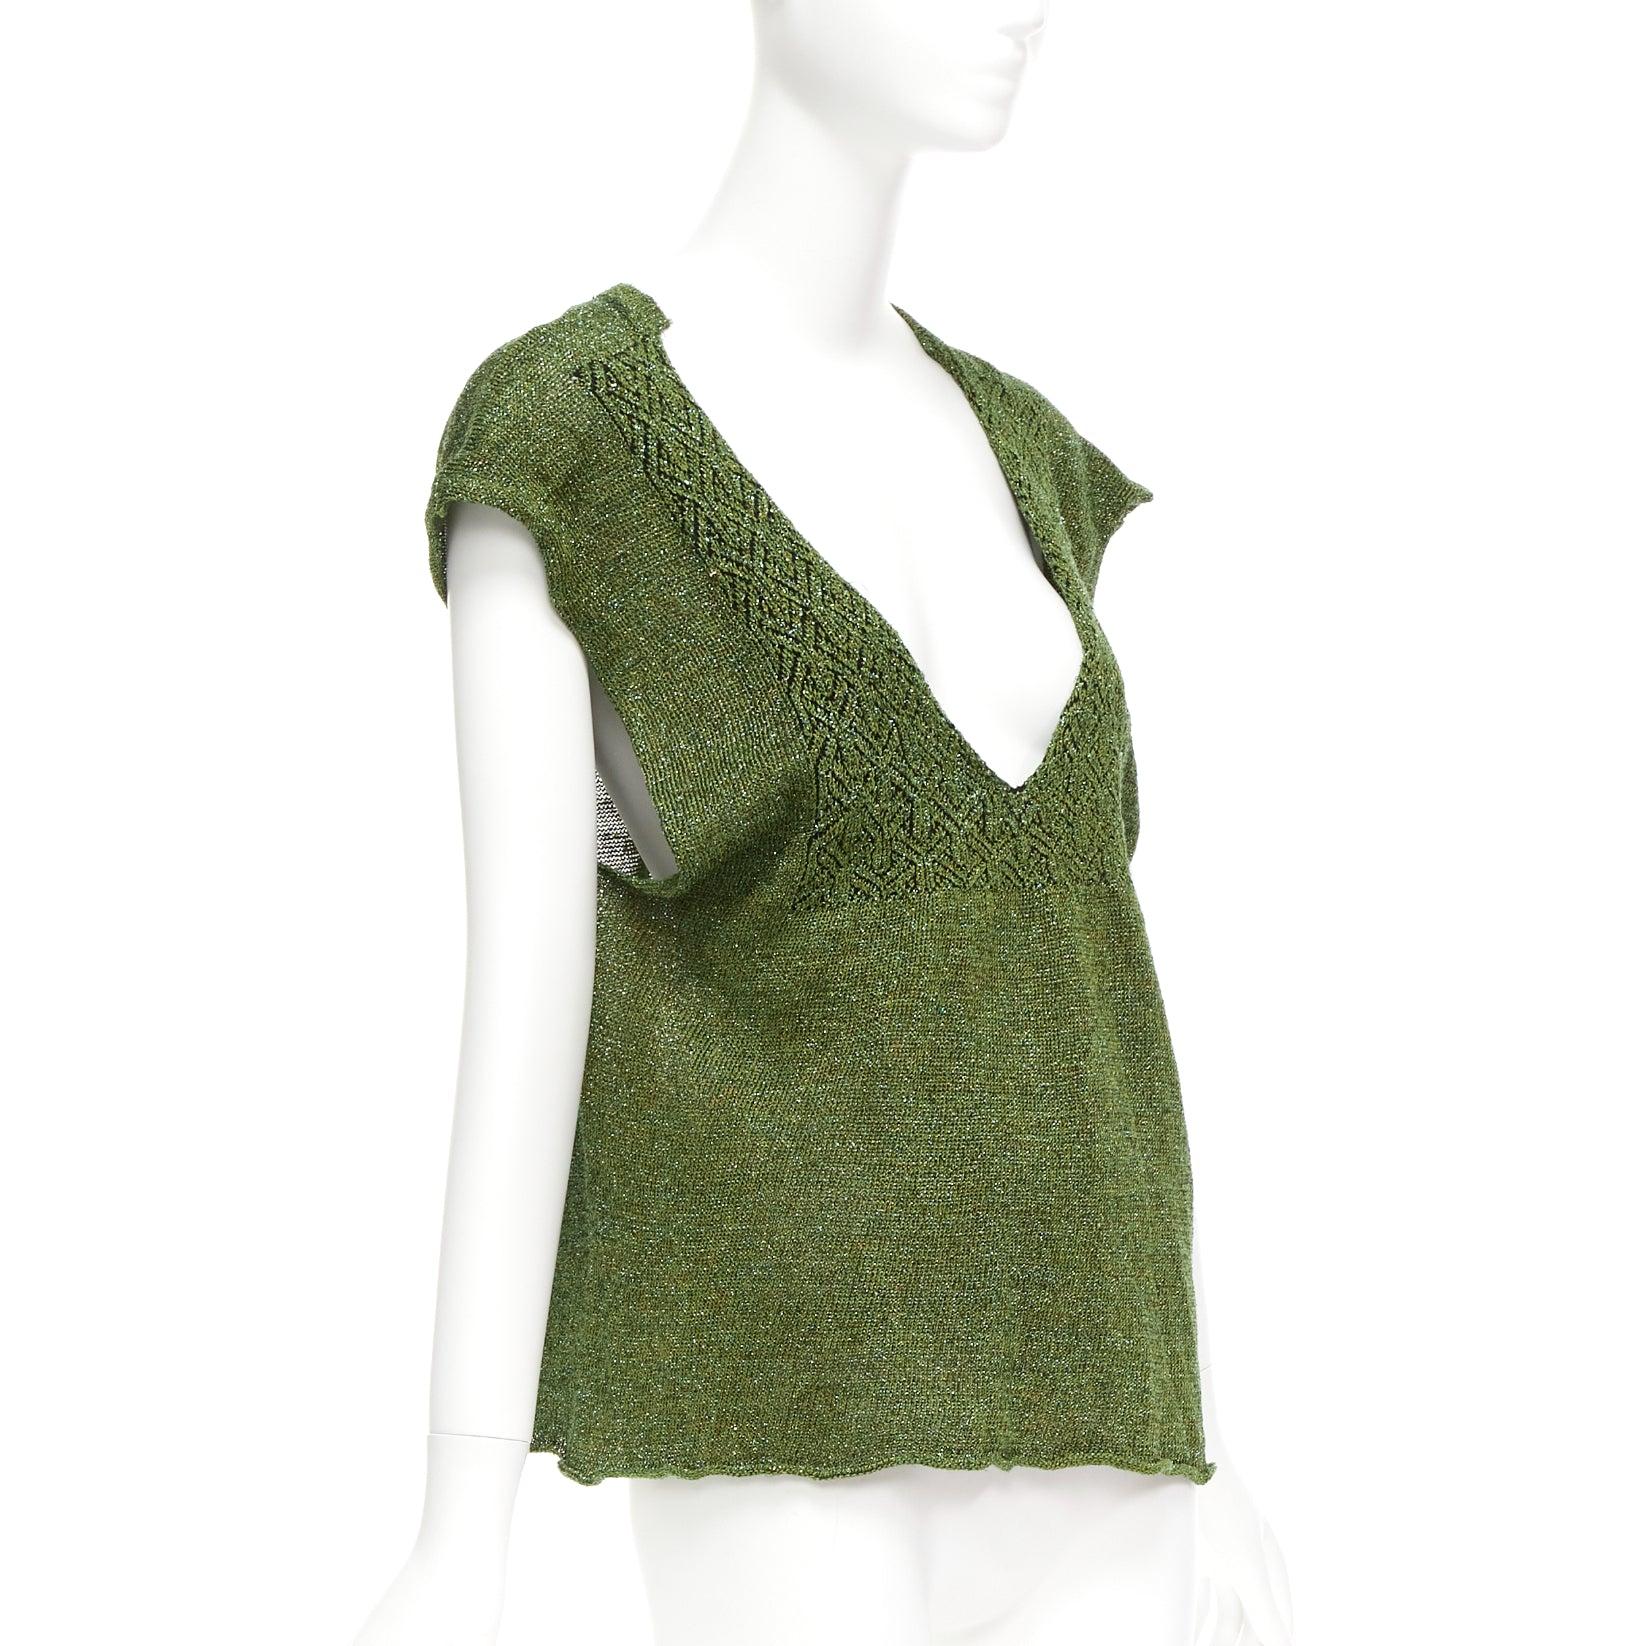 DRIES VAN NOTEN green linen blend lurex open collar knitted top S
Reference: CELG/A00347
Brand: Dries Van Noten
Material: Linen, Blend
Color: Green
Pattern: Solid
Closure: Slip On
Made in: Belgium

CONDITION:
Condition: Excellent, this item was